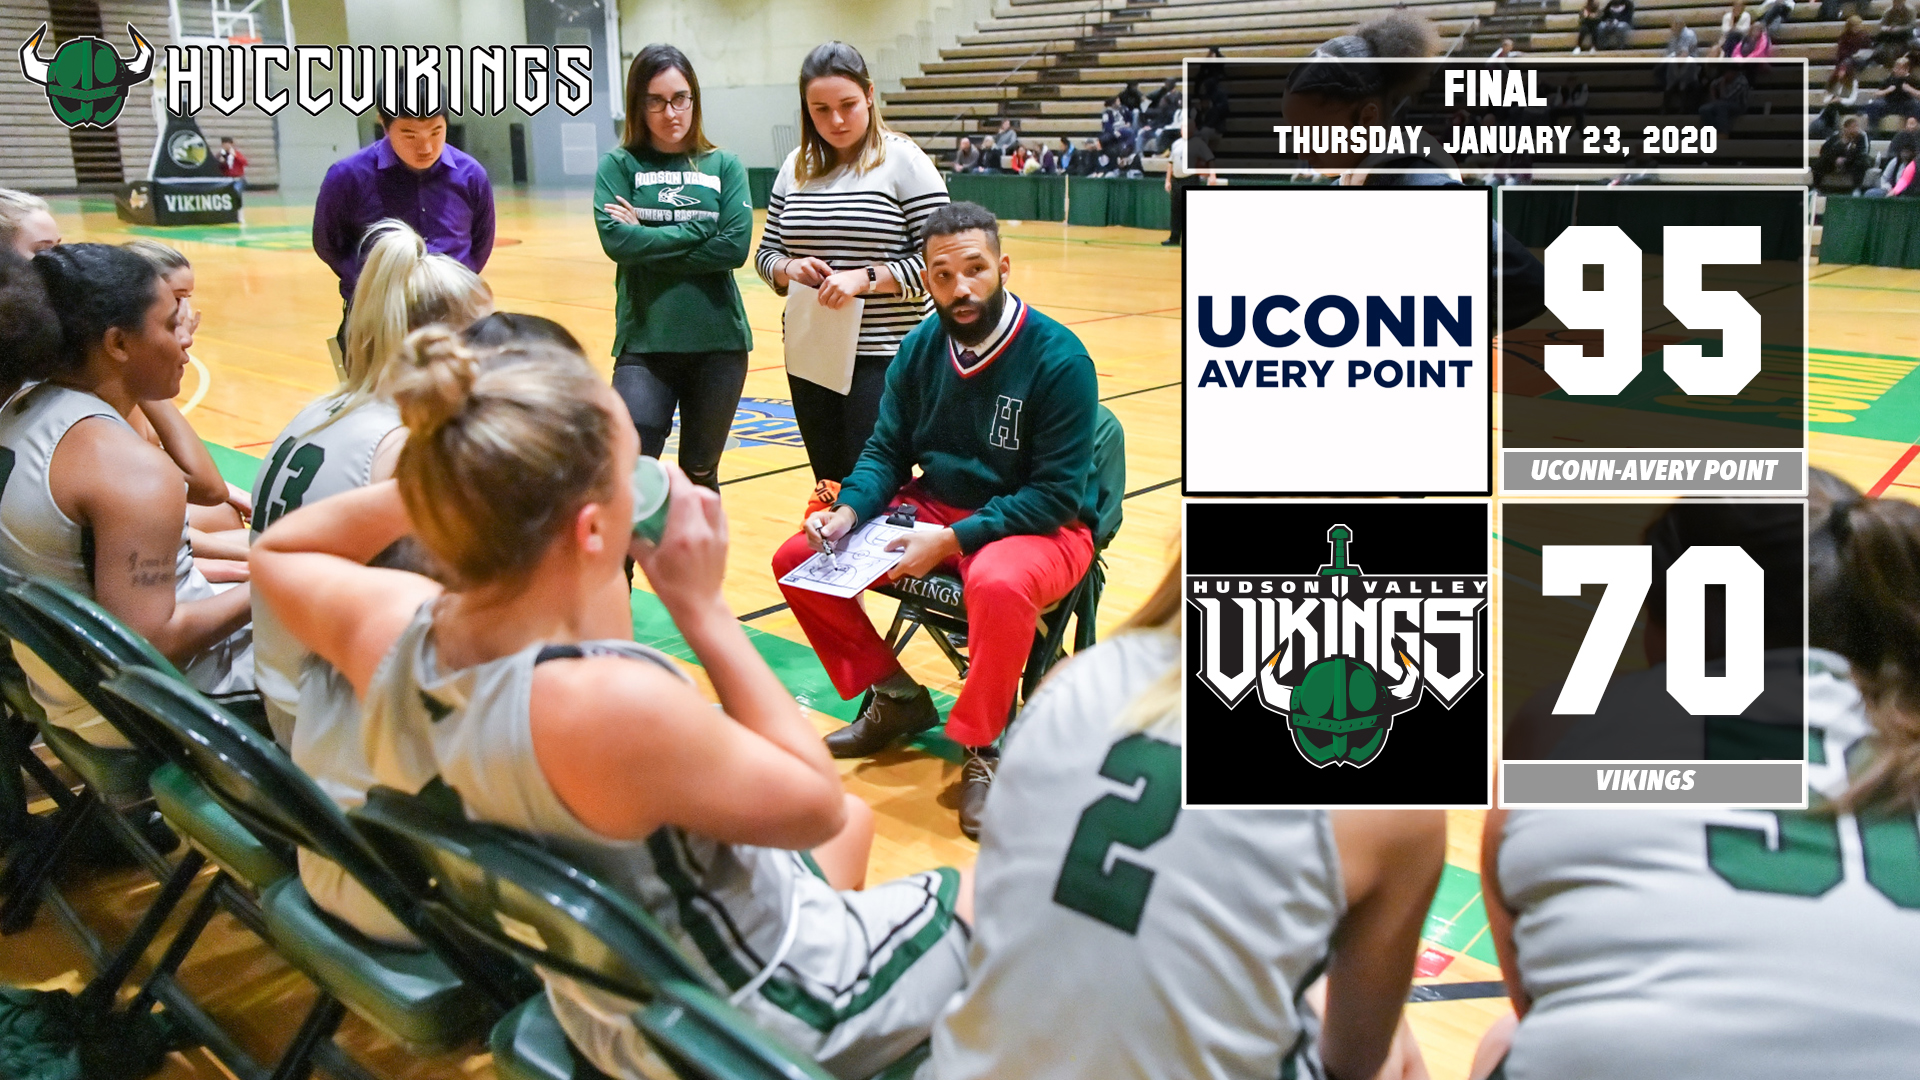 Women's basketball lost 95-70 to UConn Avery Point on Jan. 23, 2020.